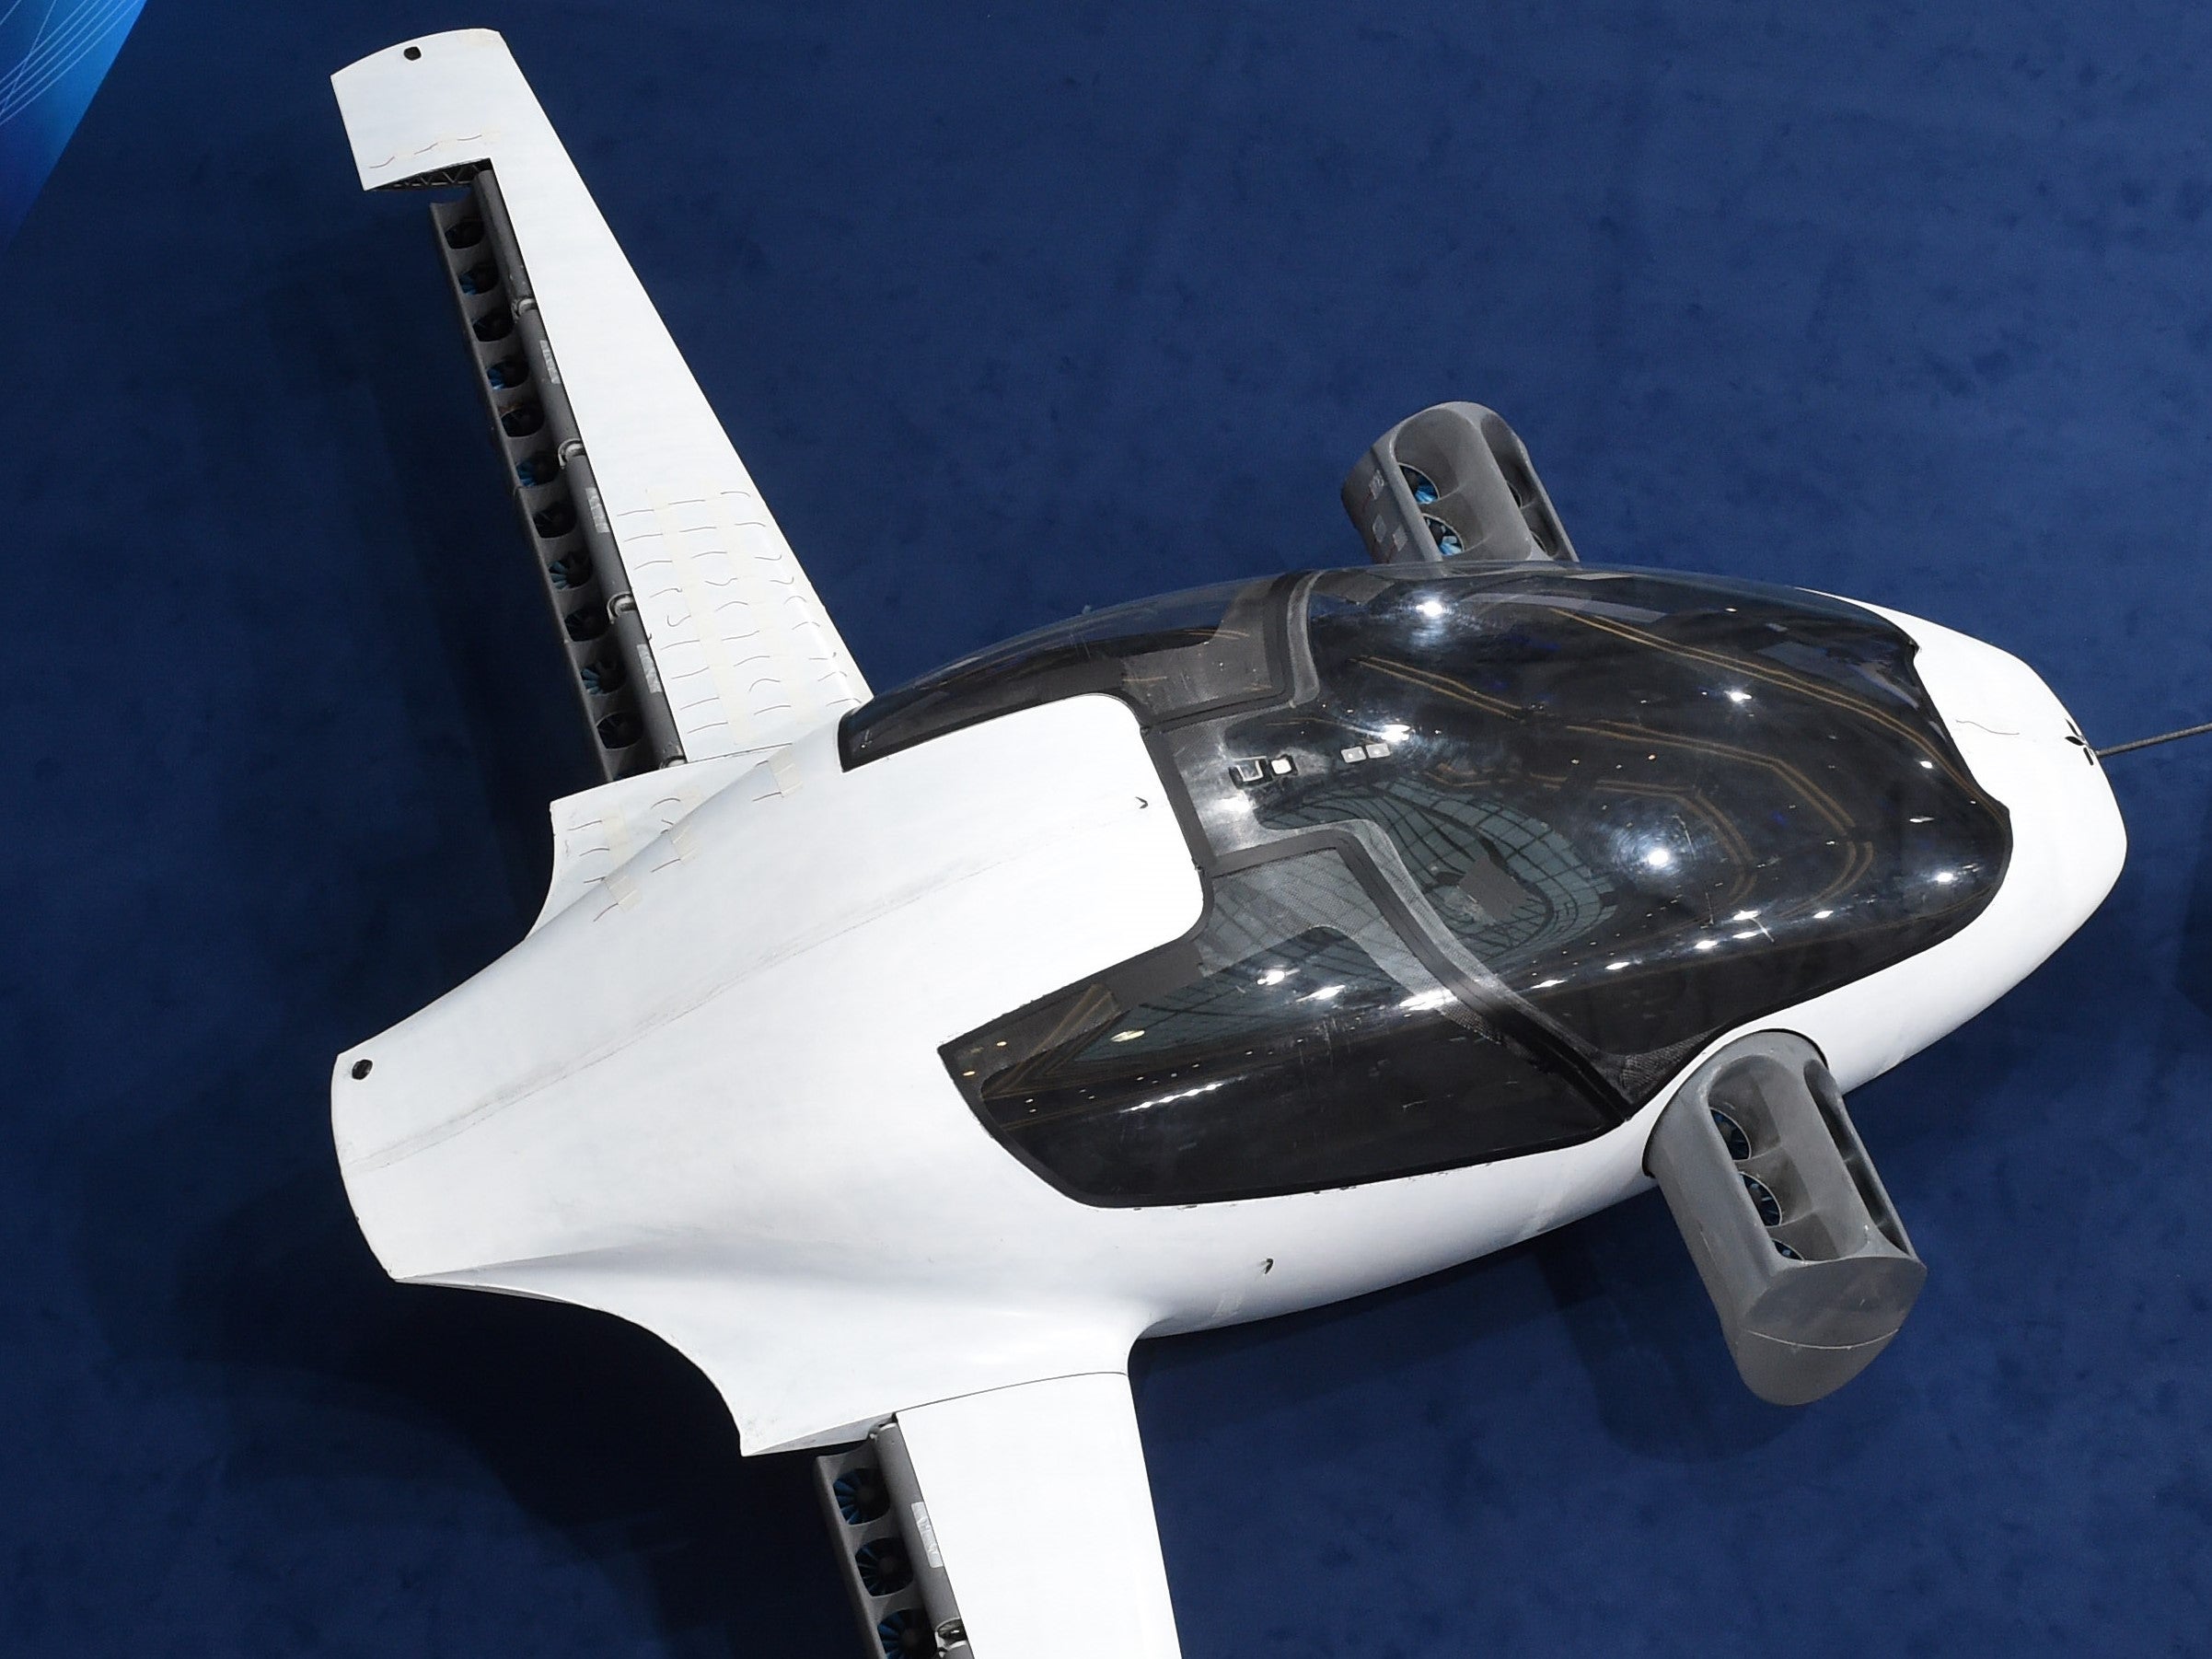 A prototype of the first flying taxi, the eVTOL - electric vertical take-off and landing Jet - of the company Lilium during the trade fair Digital Summit (Digital Gipfel) in Germany, on 4 December, 2018